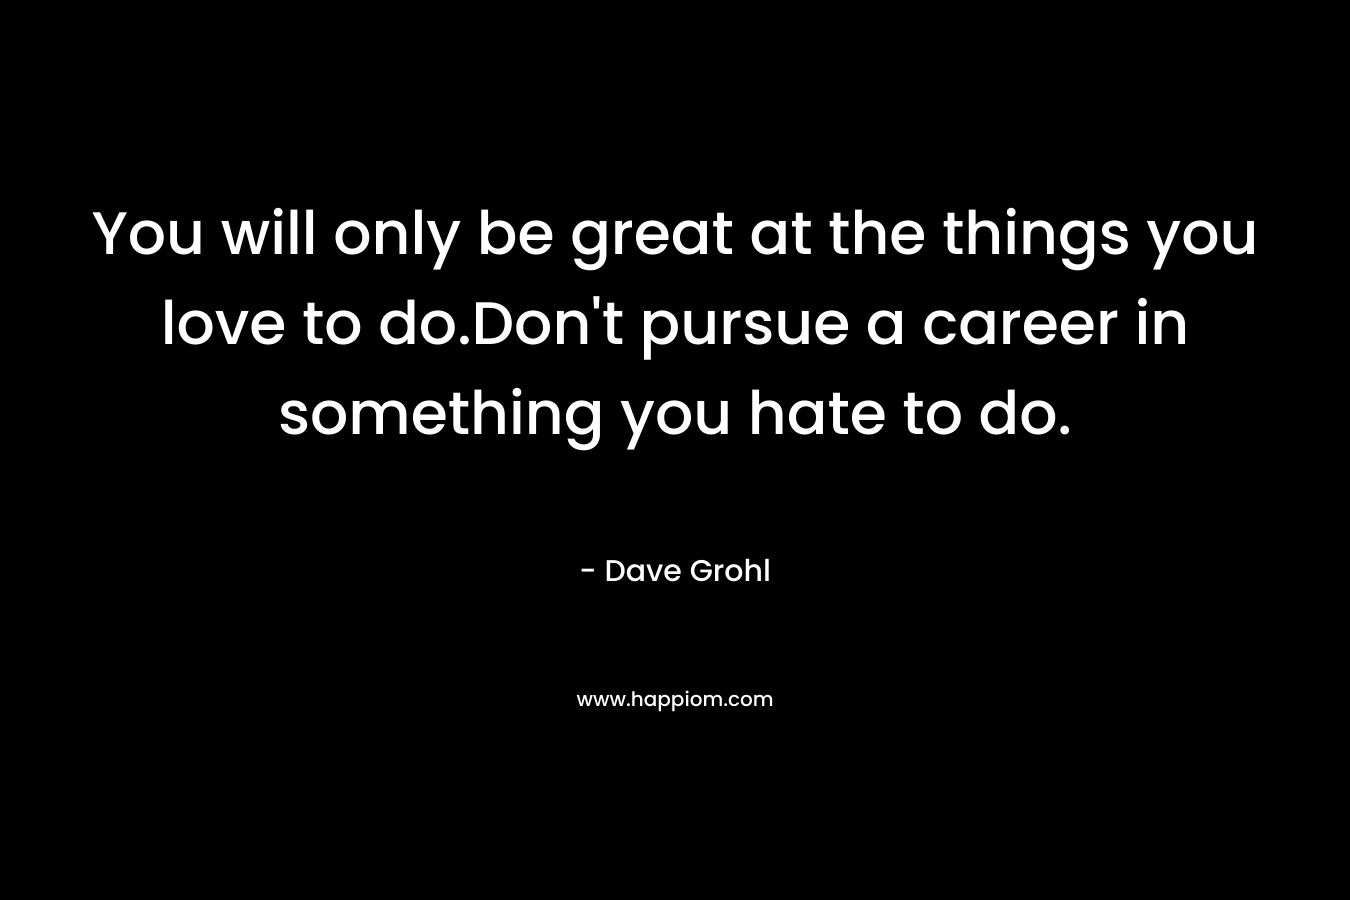 You will only be great at the things you love to do.Don't pursue a career in something you hate to do.